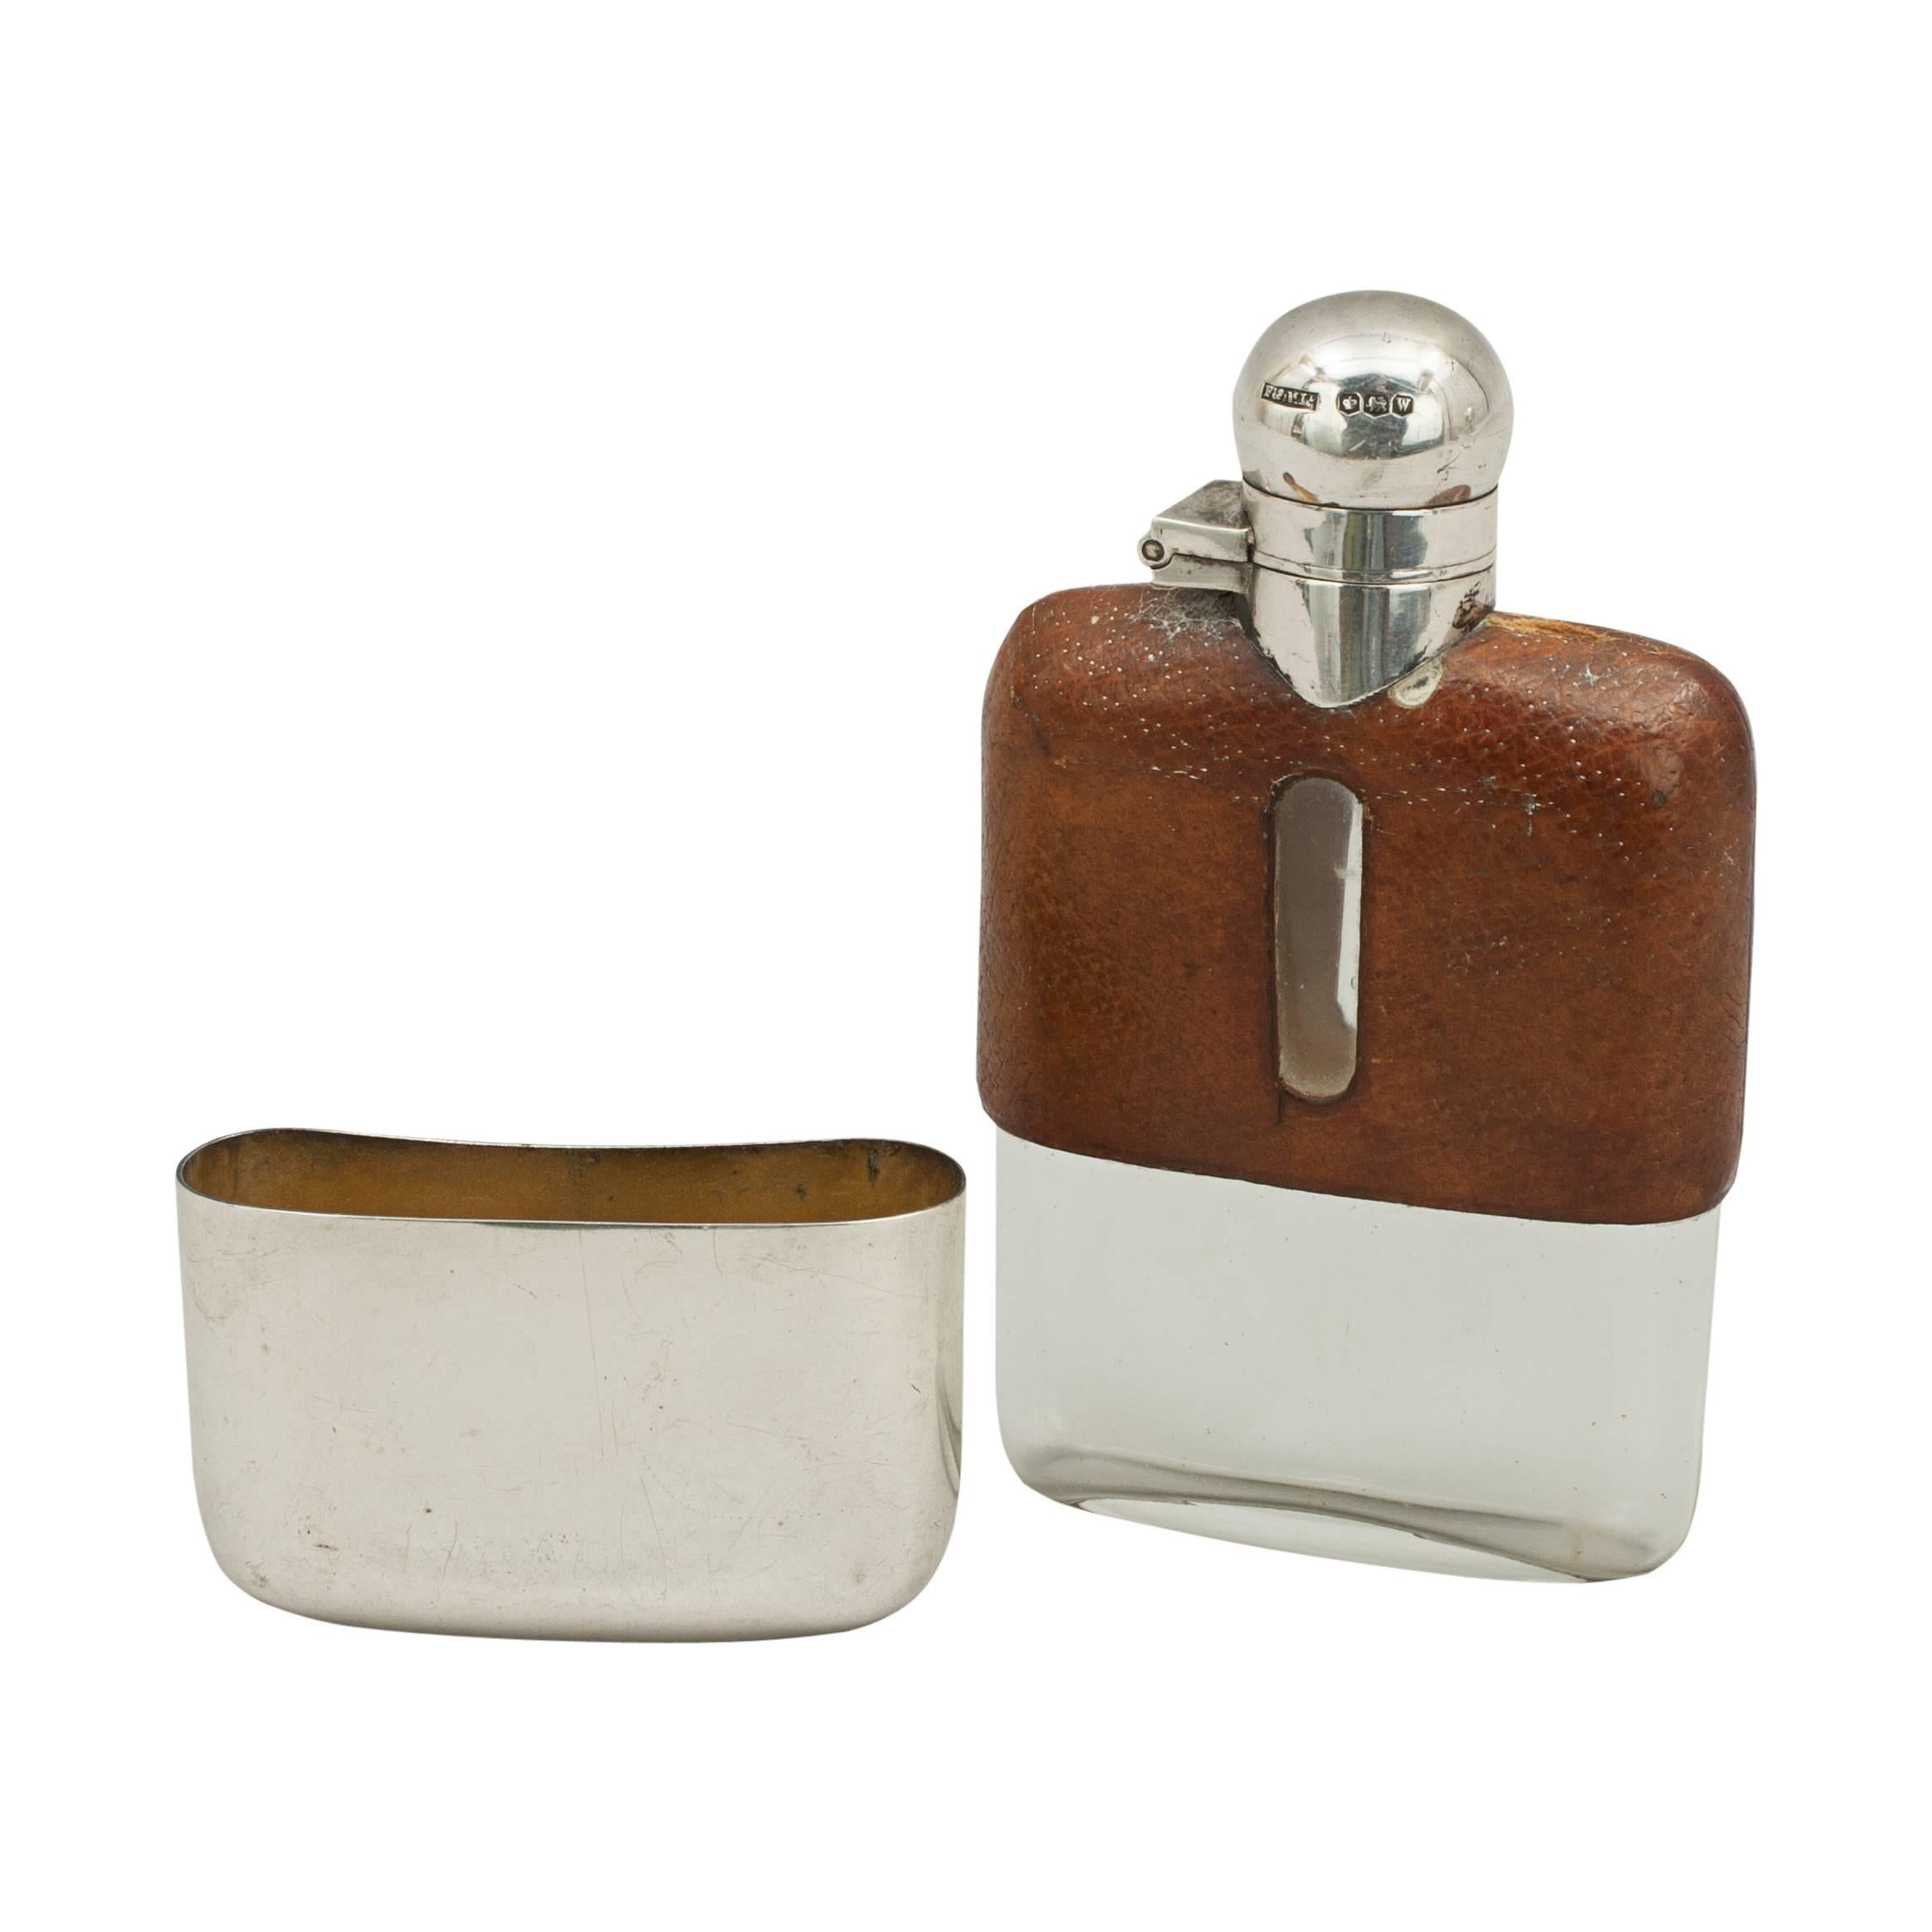 Leather and silver hip flask.
A very nice silver spirit hip flask with the top half covered in leather with level viewing windows cut into both sides. The flask with hinged lid with screw bayonet fitting, bottom with a removable silver drinking